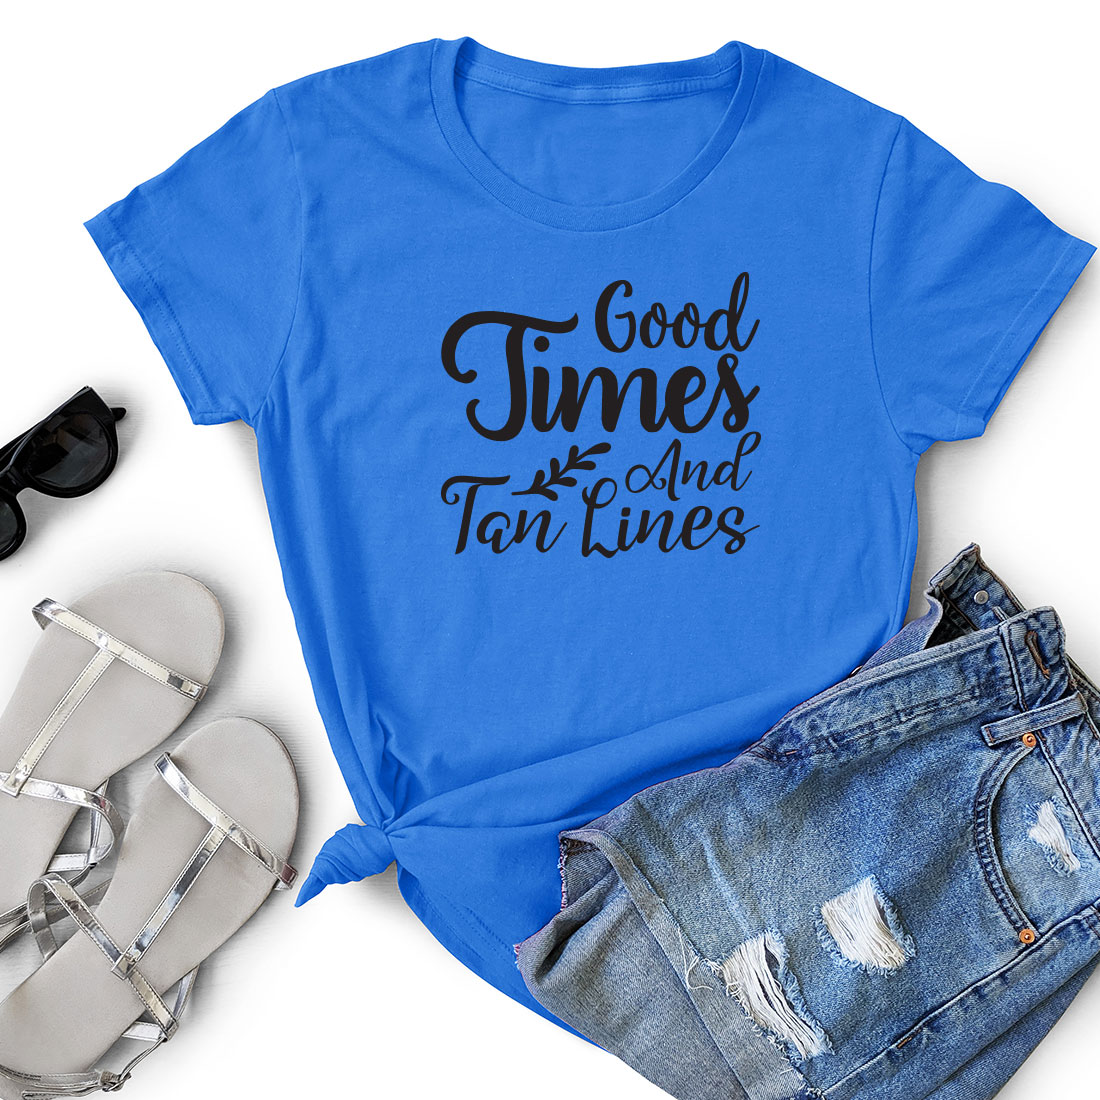 T - shirt that says good times and ten times next to a pair of.